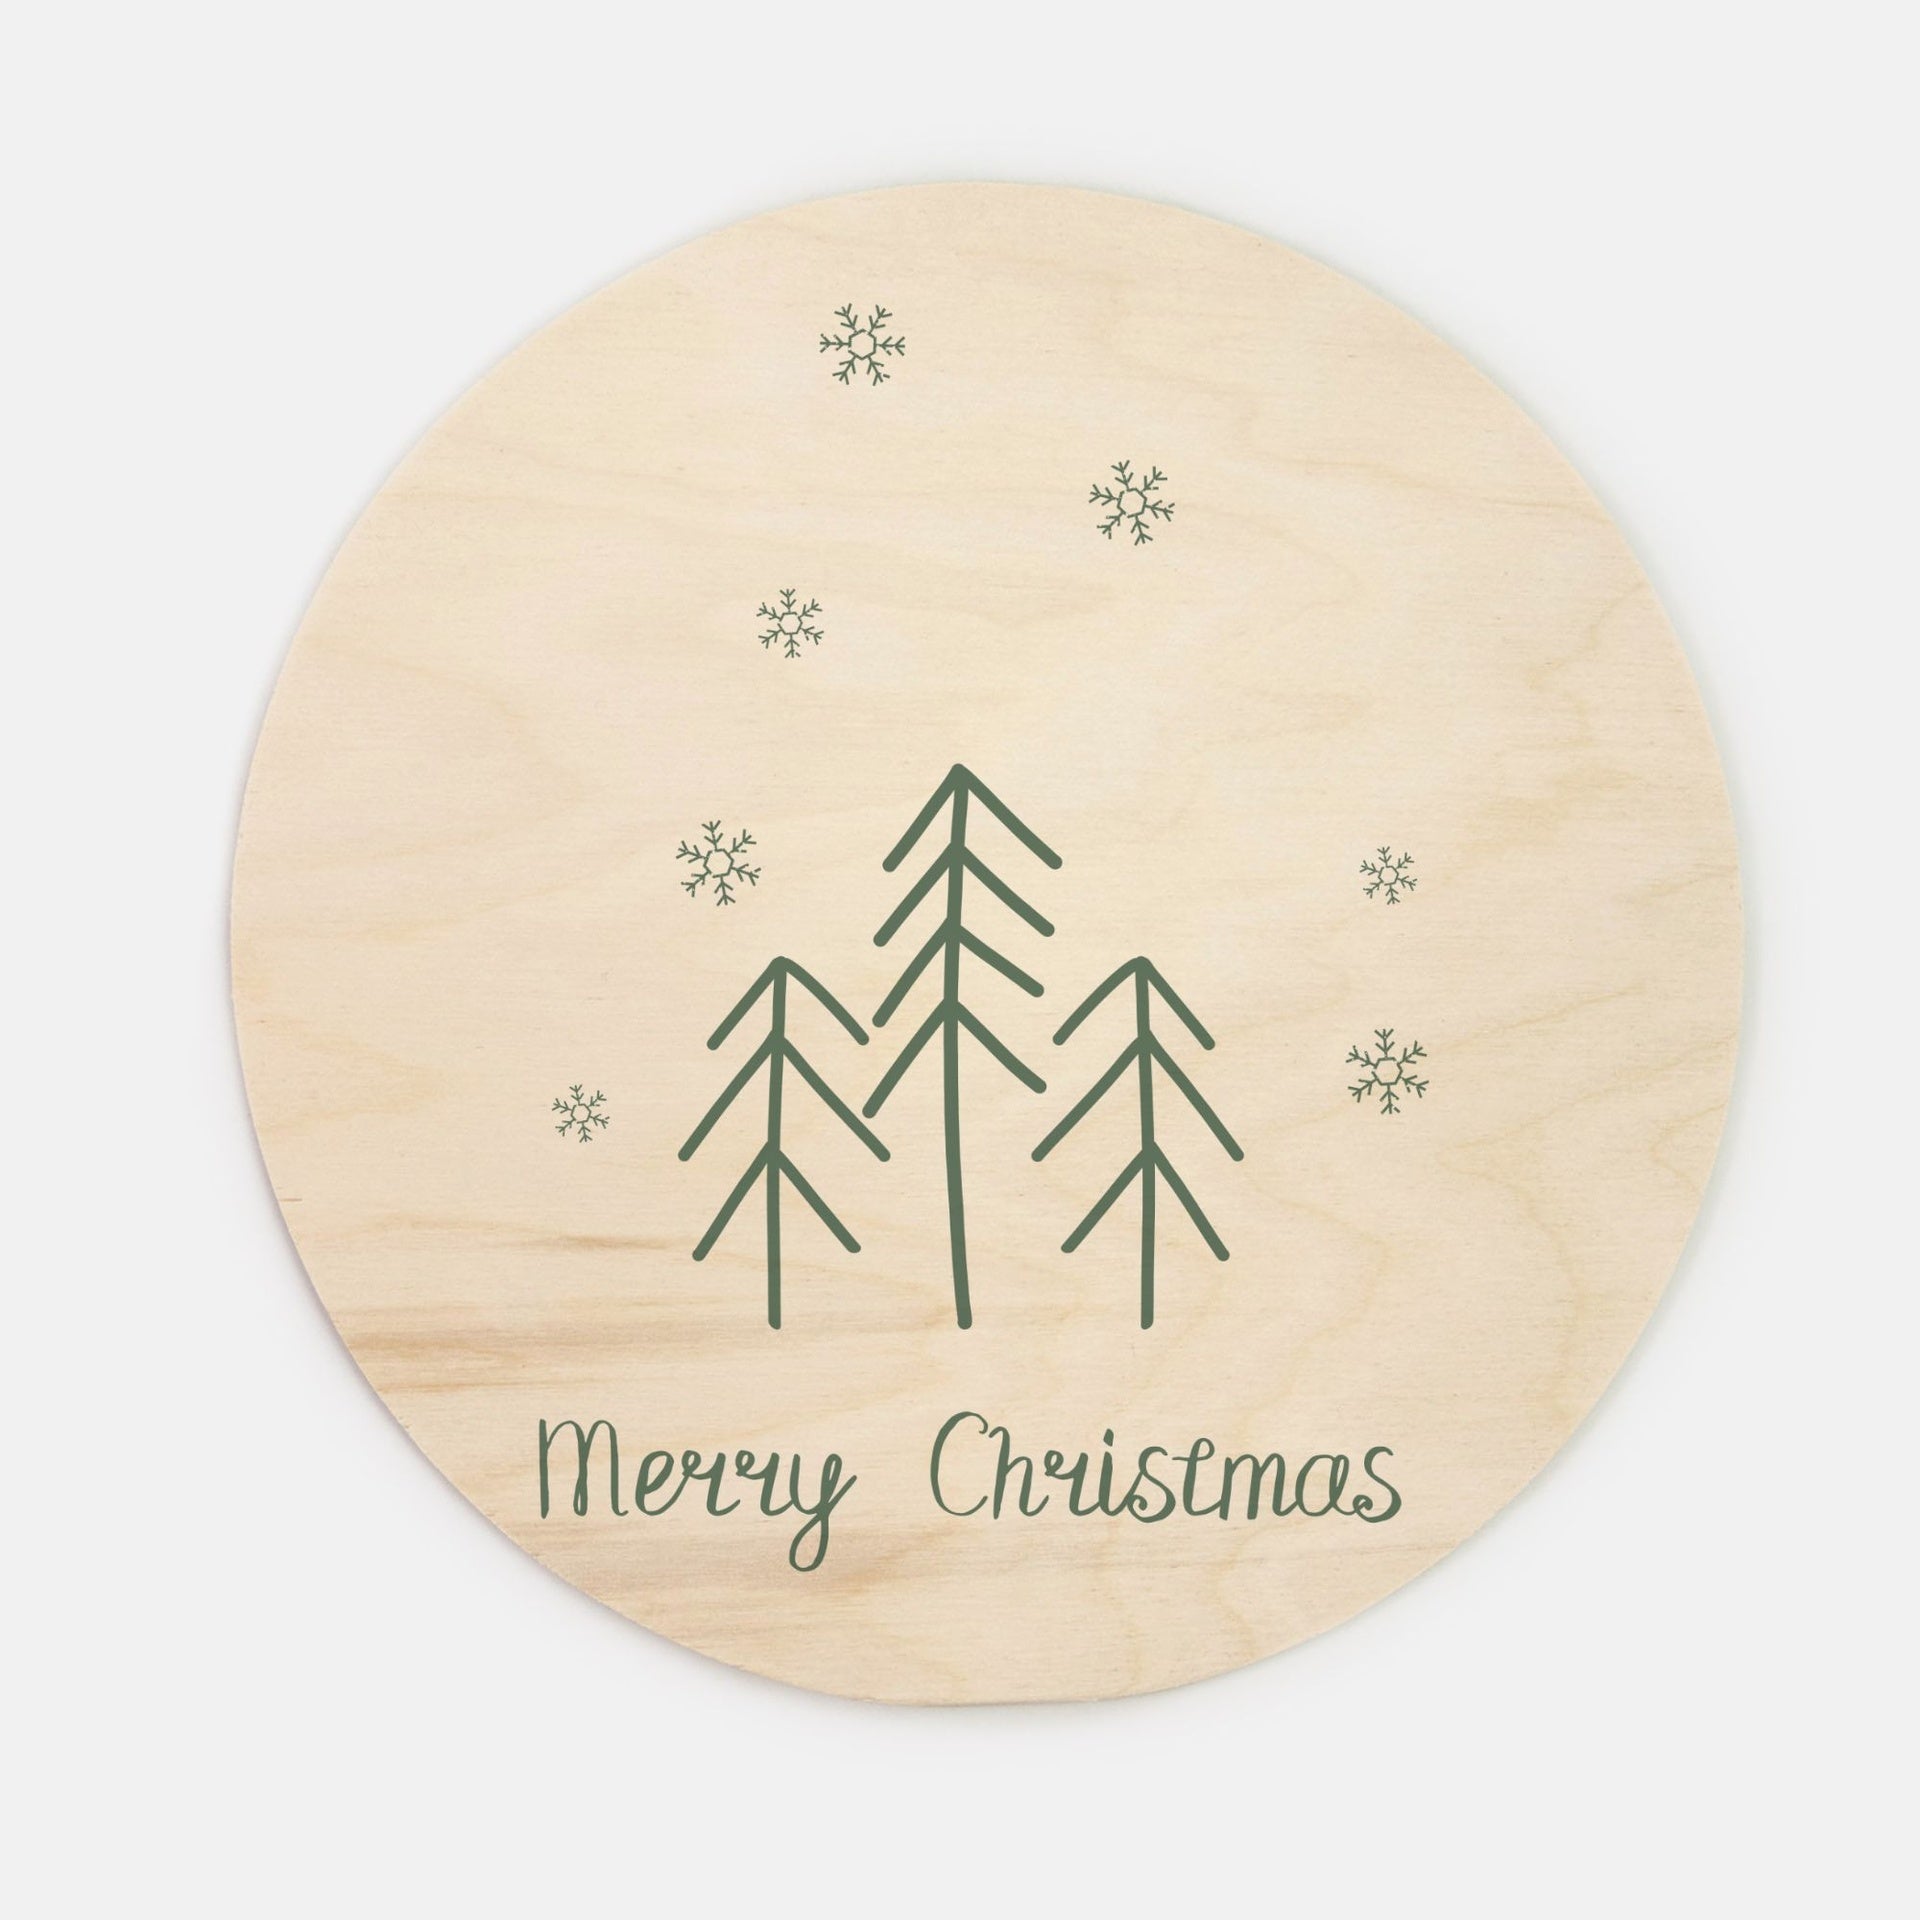 10" Round Wood Sign - Merry Christmas & Snowflakes